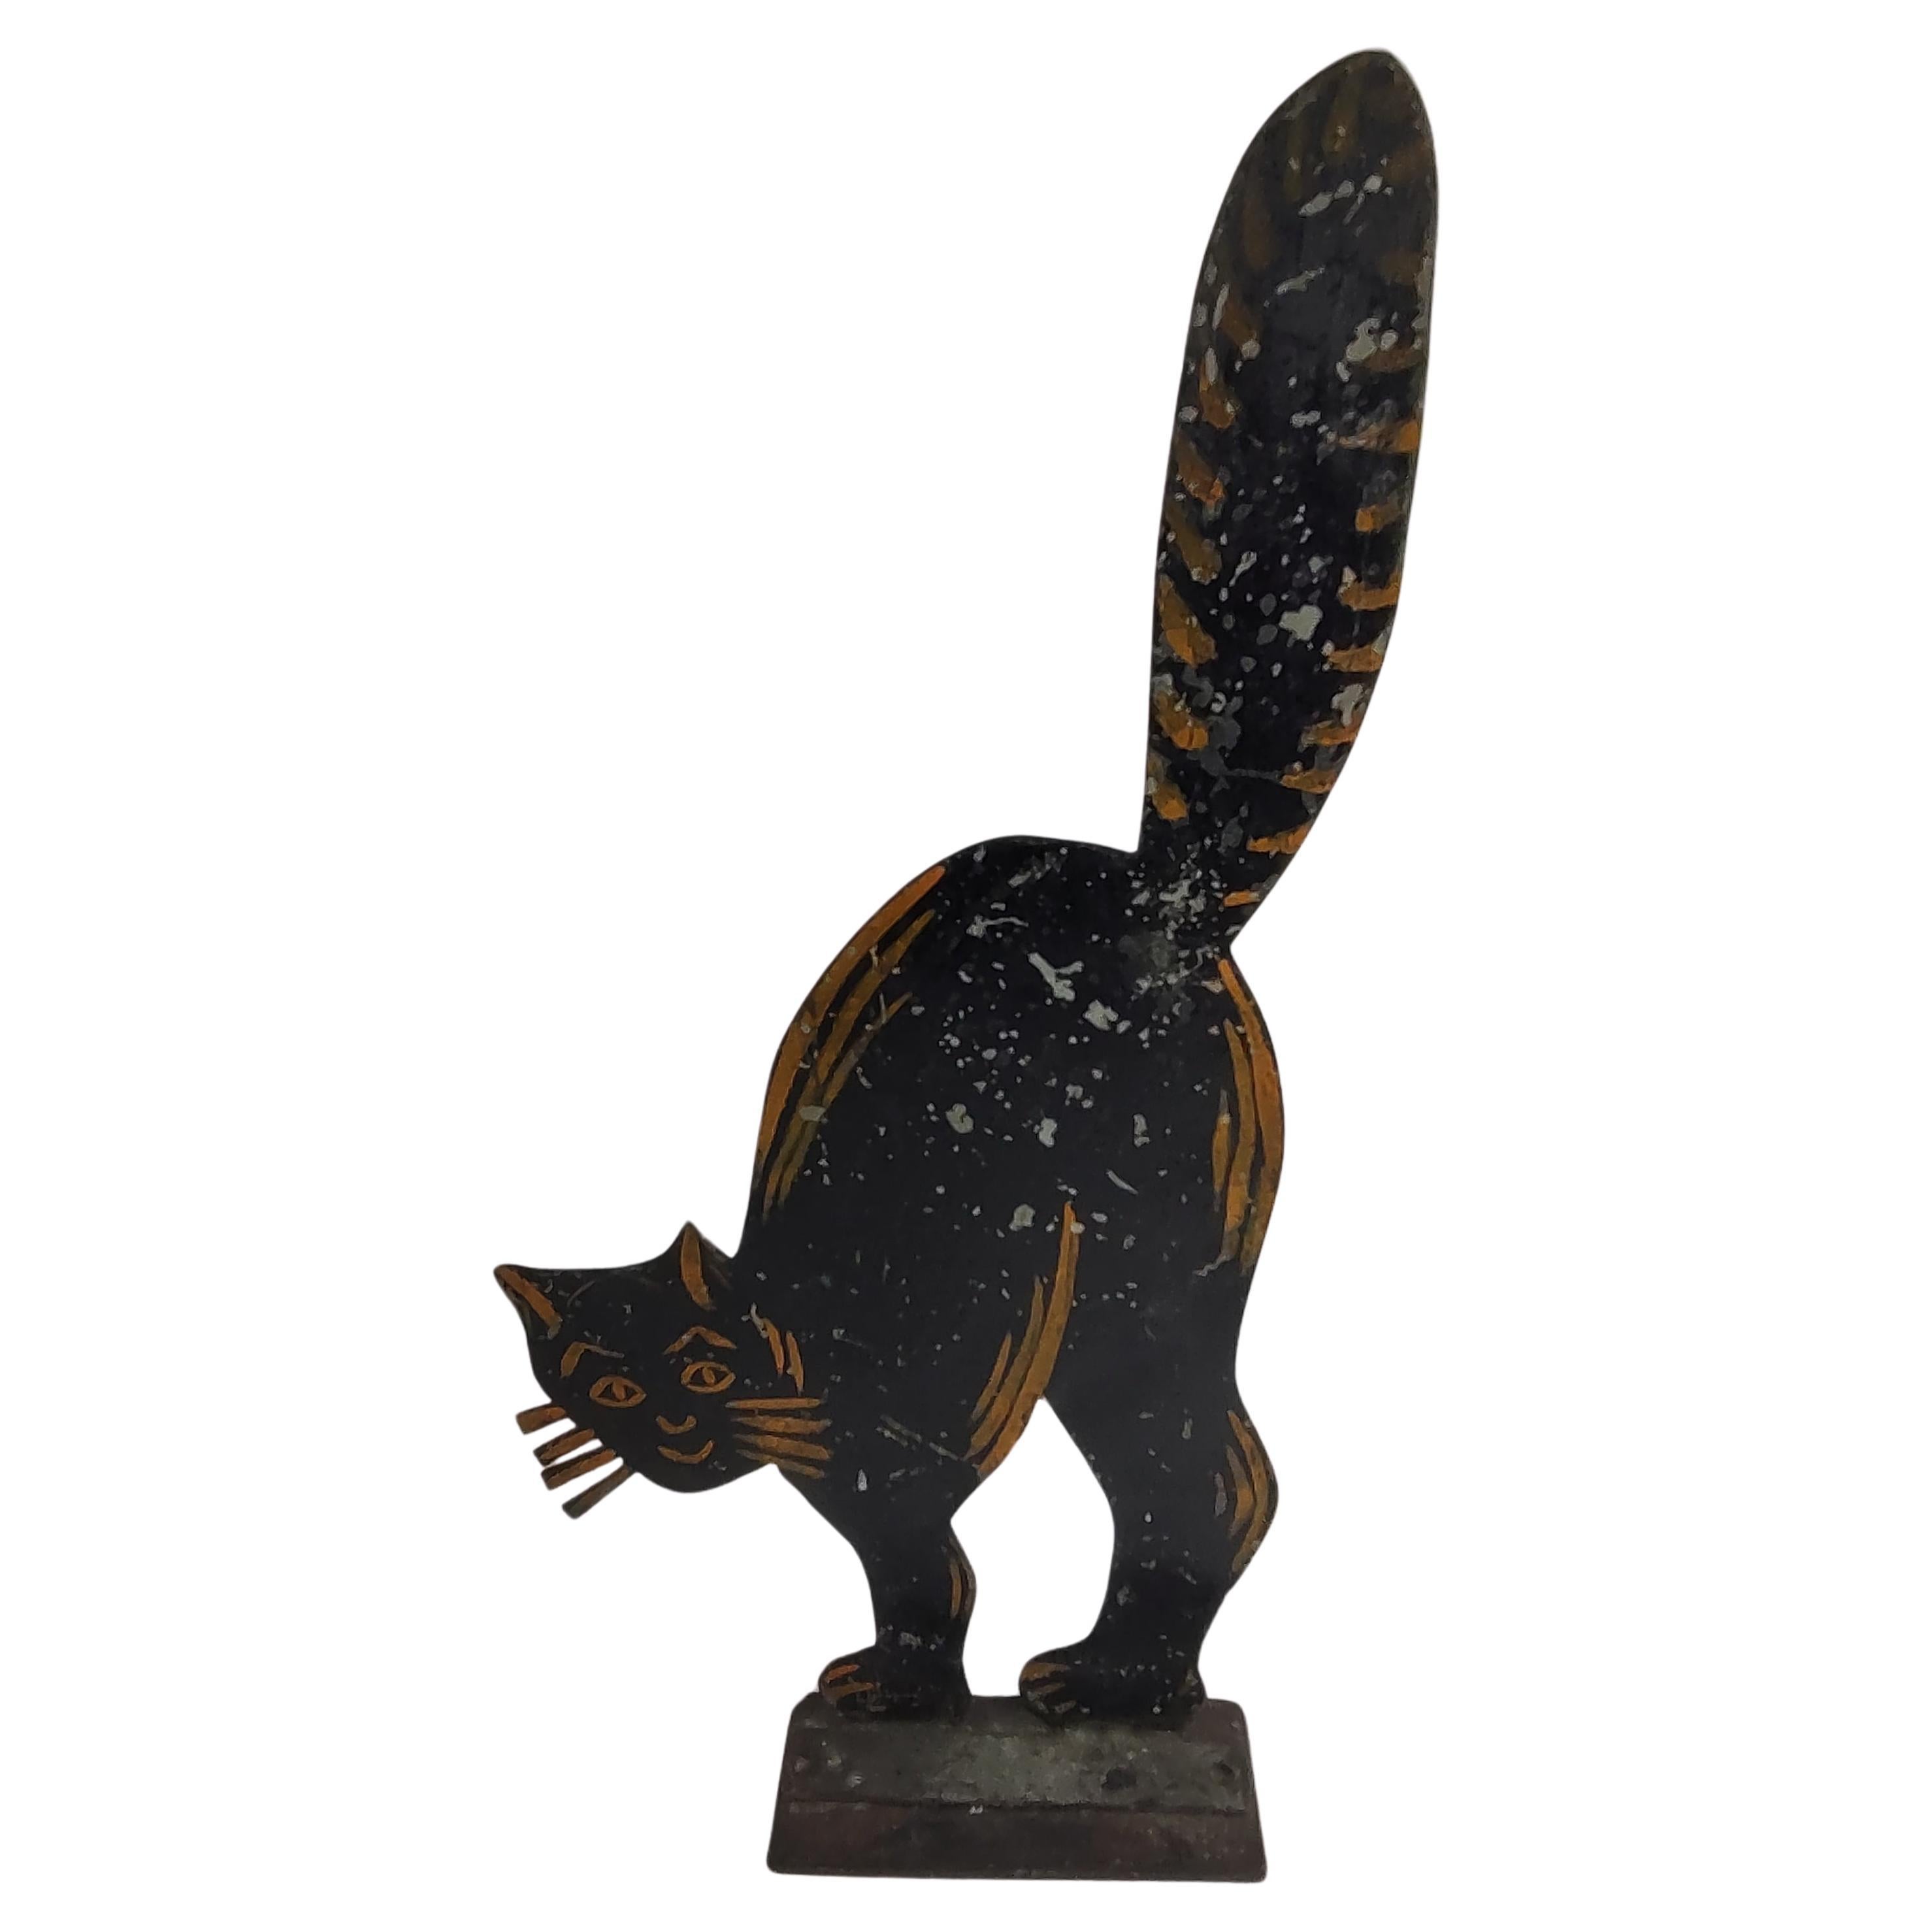 Fabulous and rare painted sheet metal black cat with arched back and prominent whiskers door stop. Measures : Tall 23 x 10.75 so it makes it's presence felt. Very cool cat! In original paint with some chips.